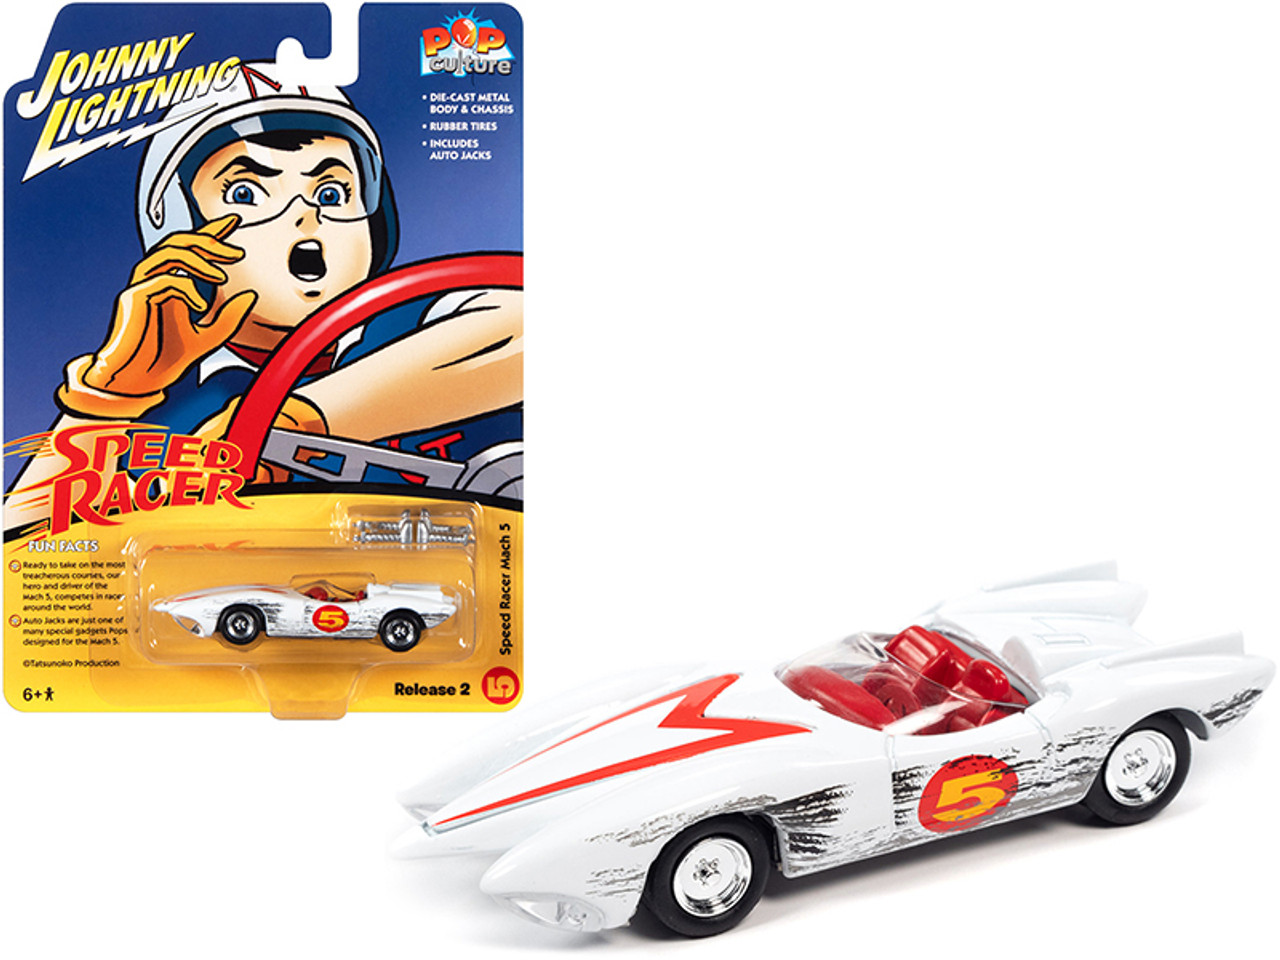 Speed Racer Mach 5 White (Race Worn Version) with Auto Jacks "Pop Culture" Series 1/64 Diecast Model Car by Johnny Lightning